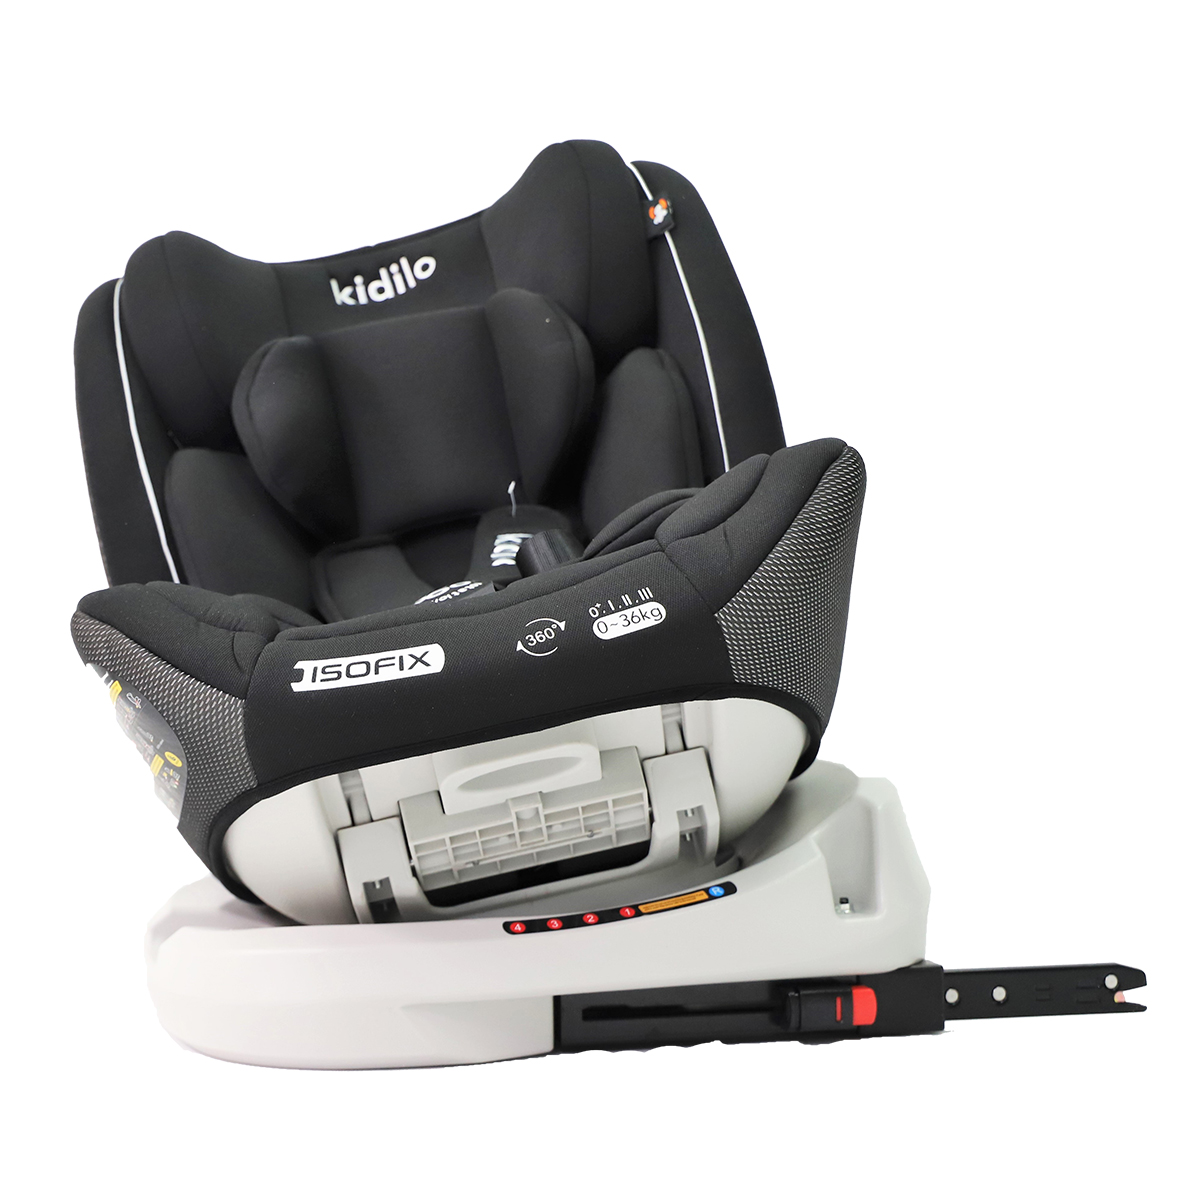 Kidilo 360 rotate Car Seat with Isofix - Black&Charcoal